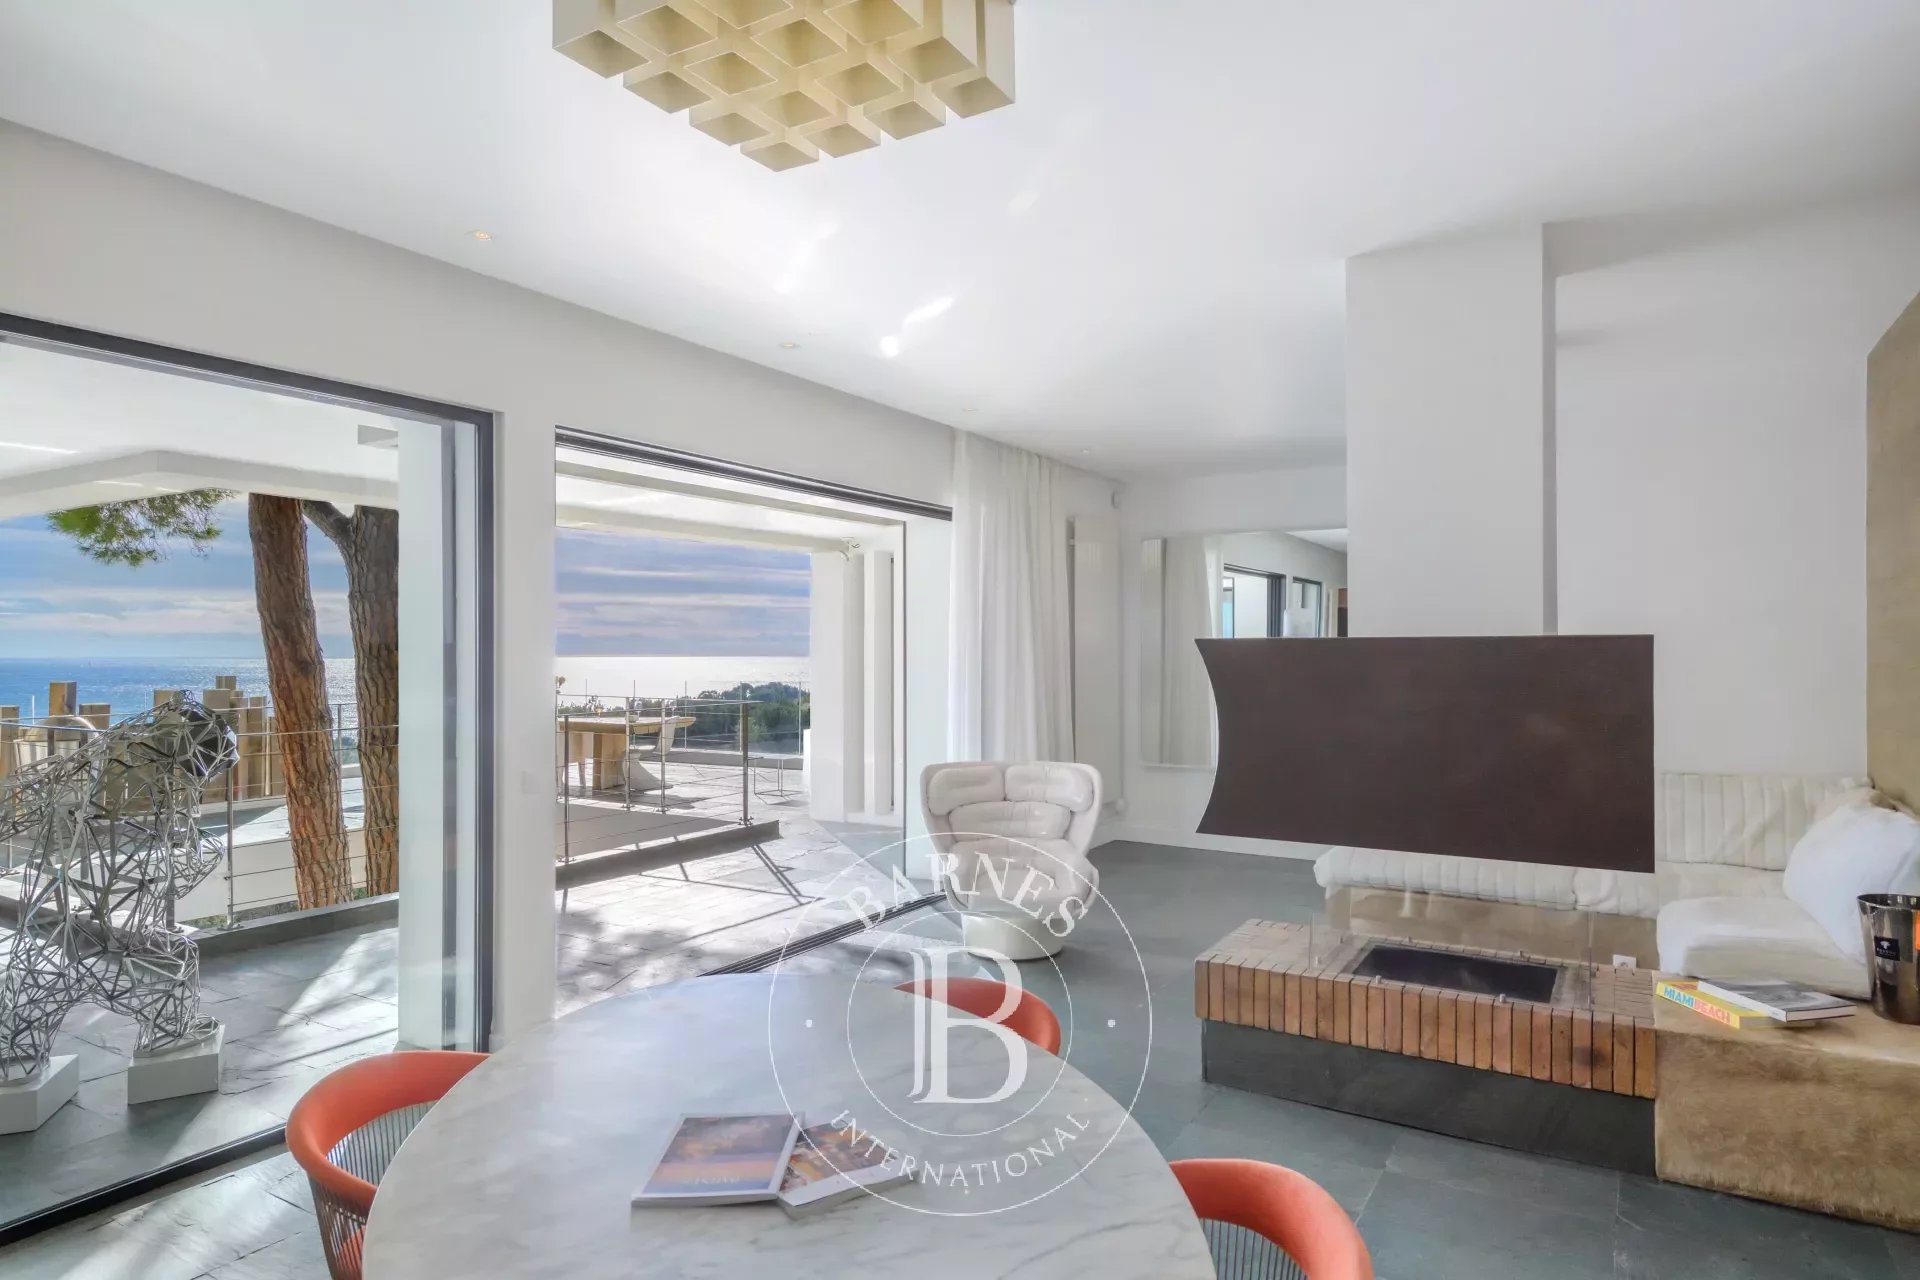 Vente - Cassis - Luxe - Vue mer panoramique - picture 10 title=